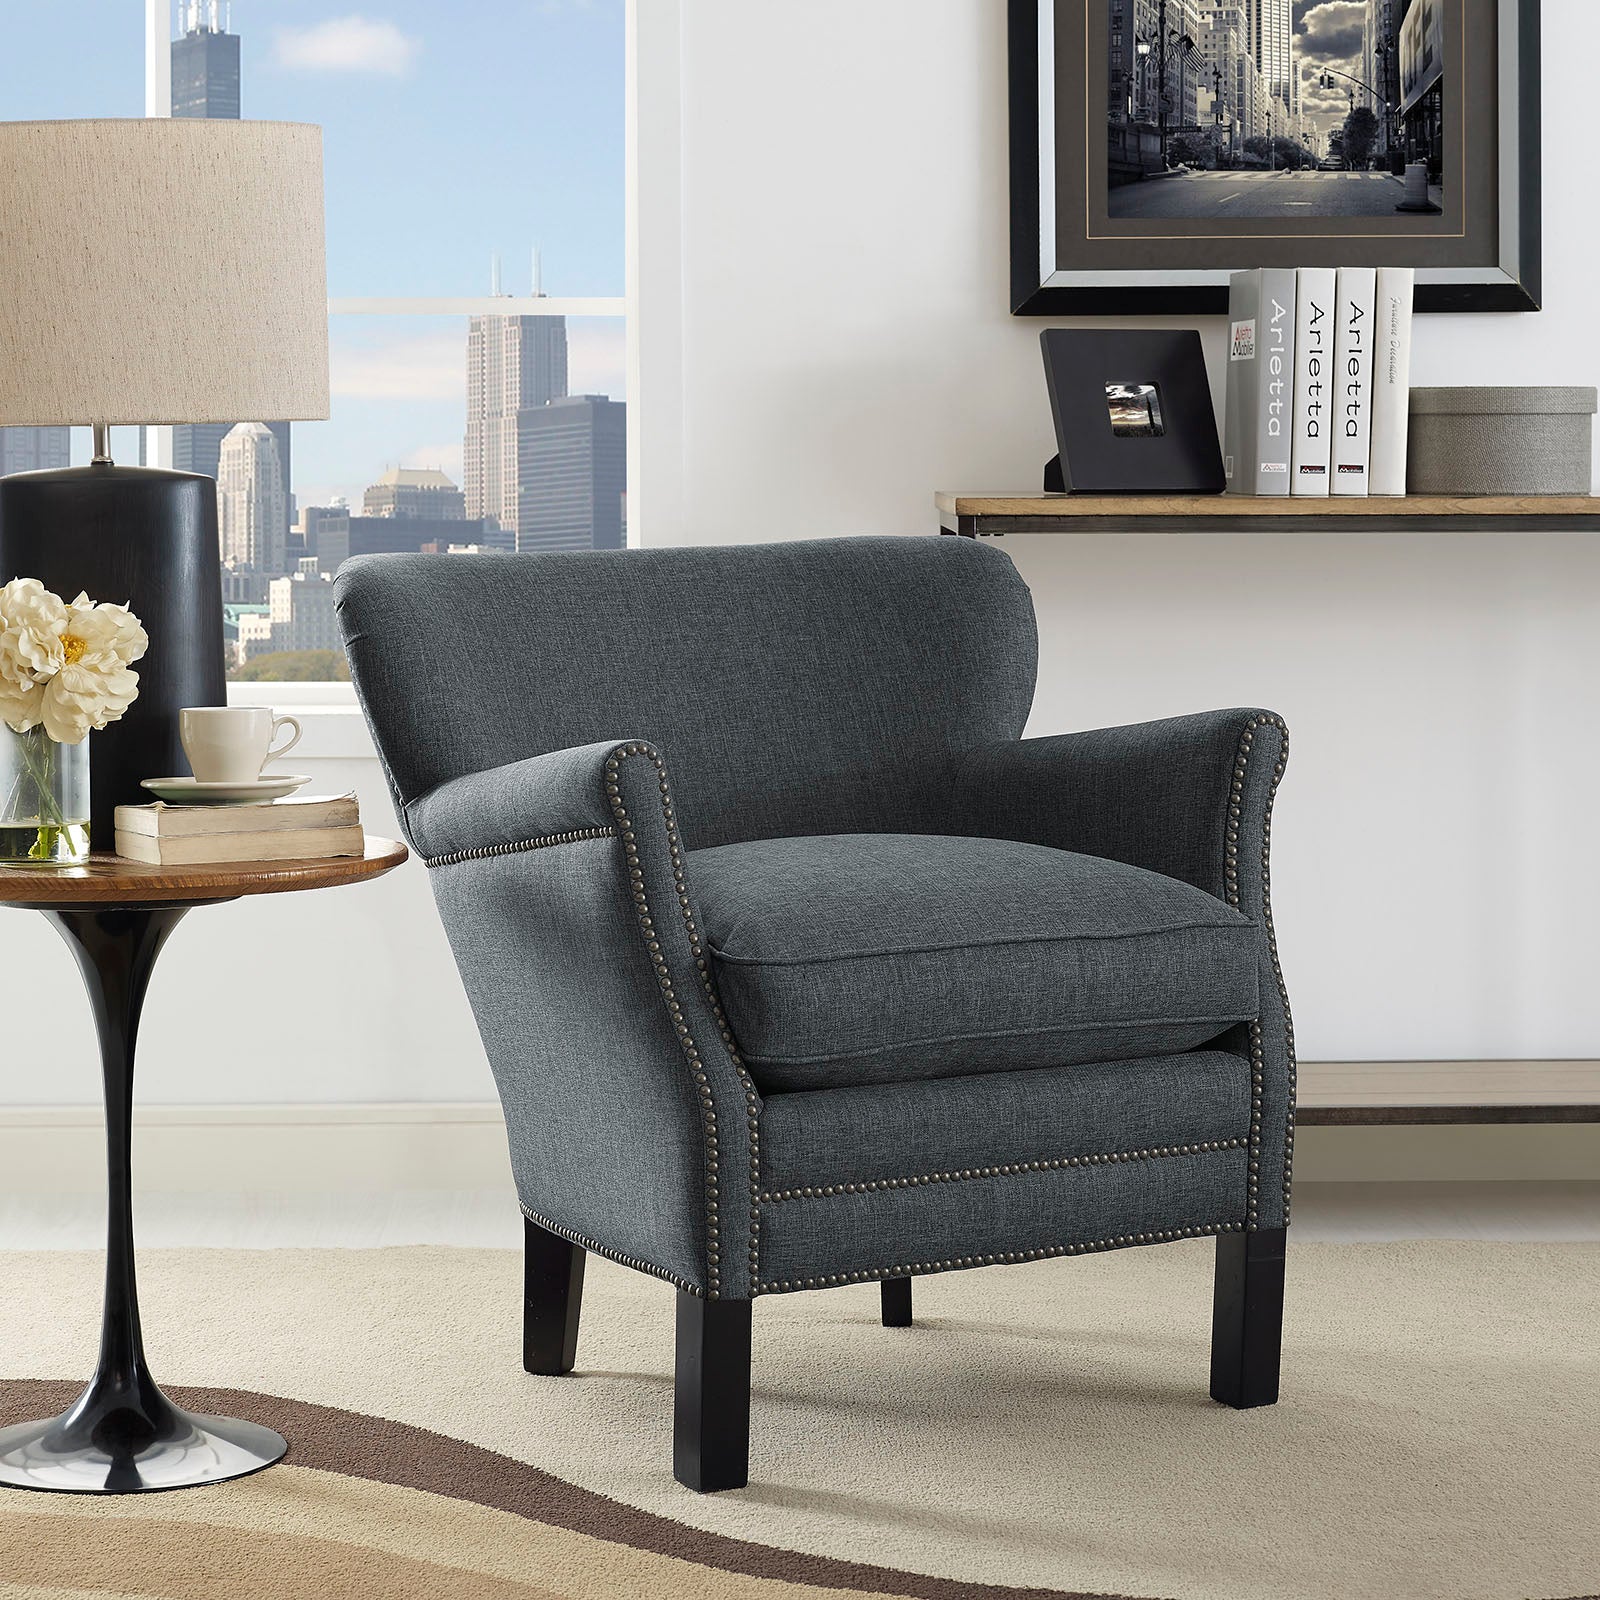 Modway Chairs - Key Upholstered Fabric Armchair Gray